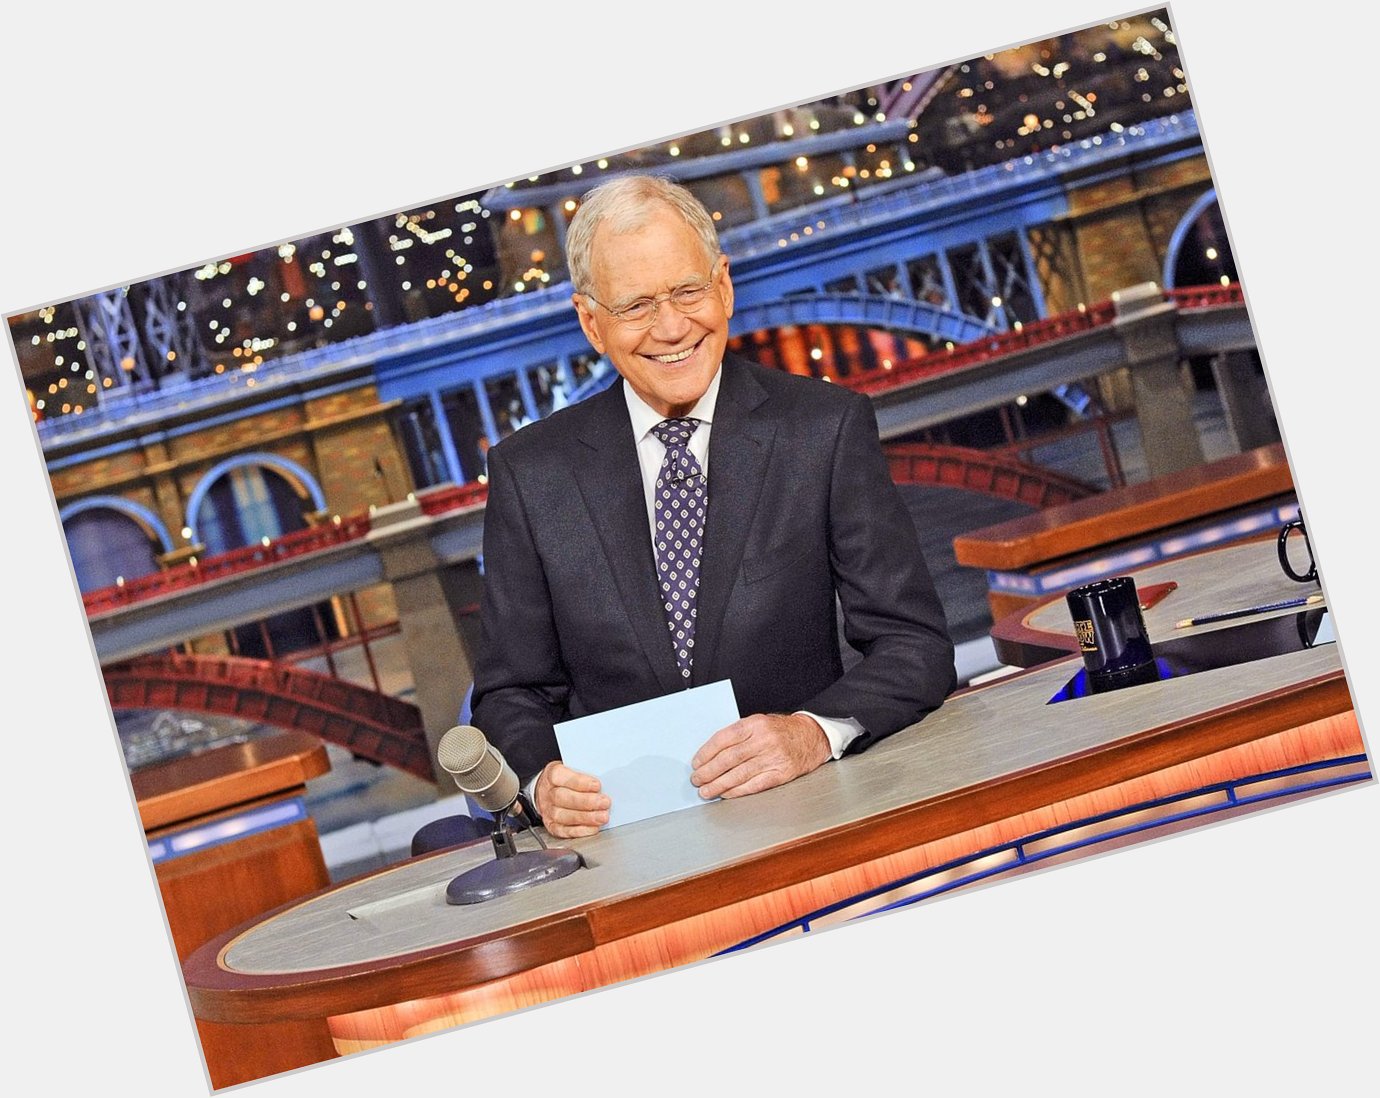 David Letterman\s departure is a primary reason I stopped watching television. Happy birthday, Dave! 